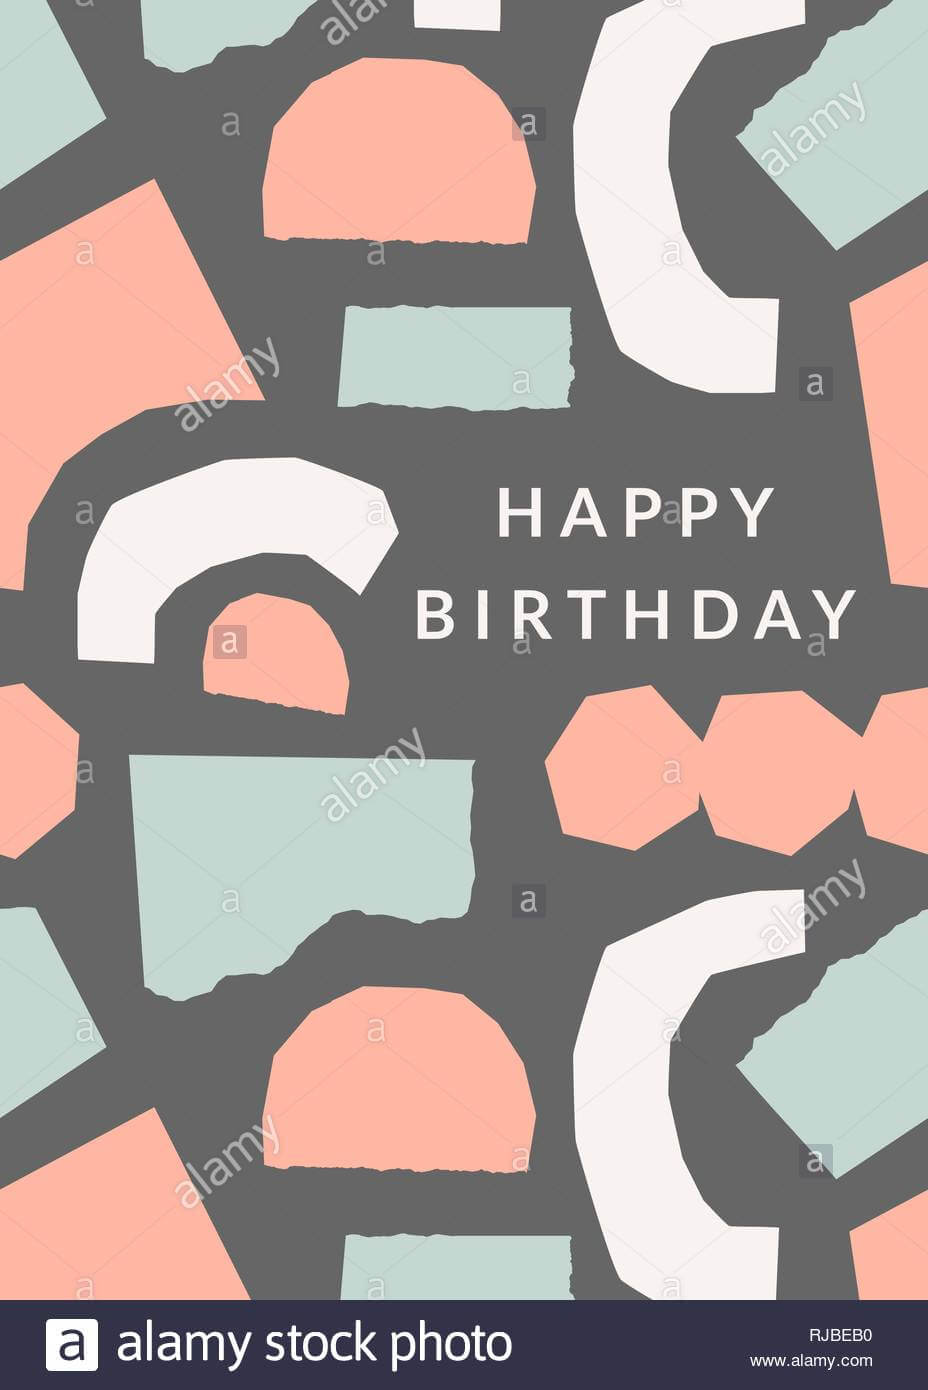 Greeting Card Template With Torn Paper Pieces In Pastel Regarding Birthday Card Collage Template